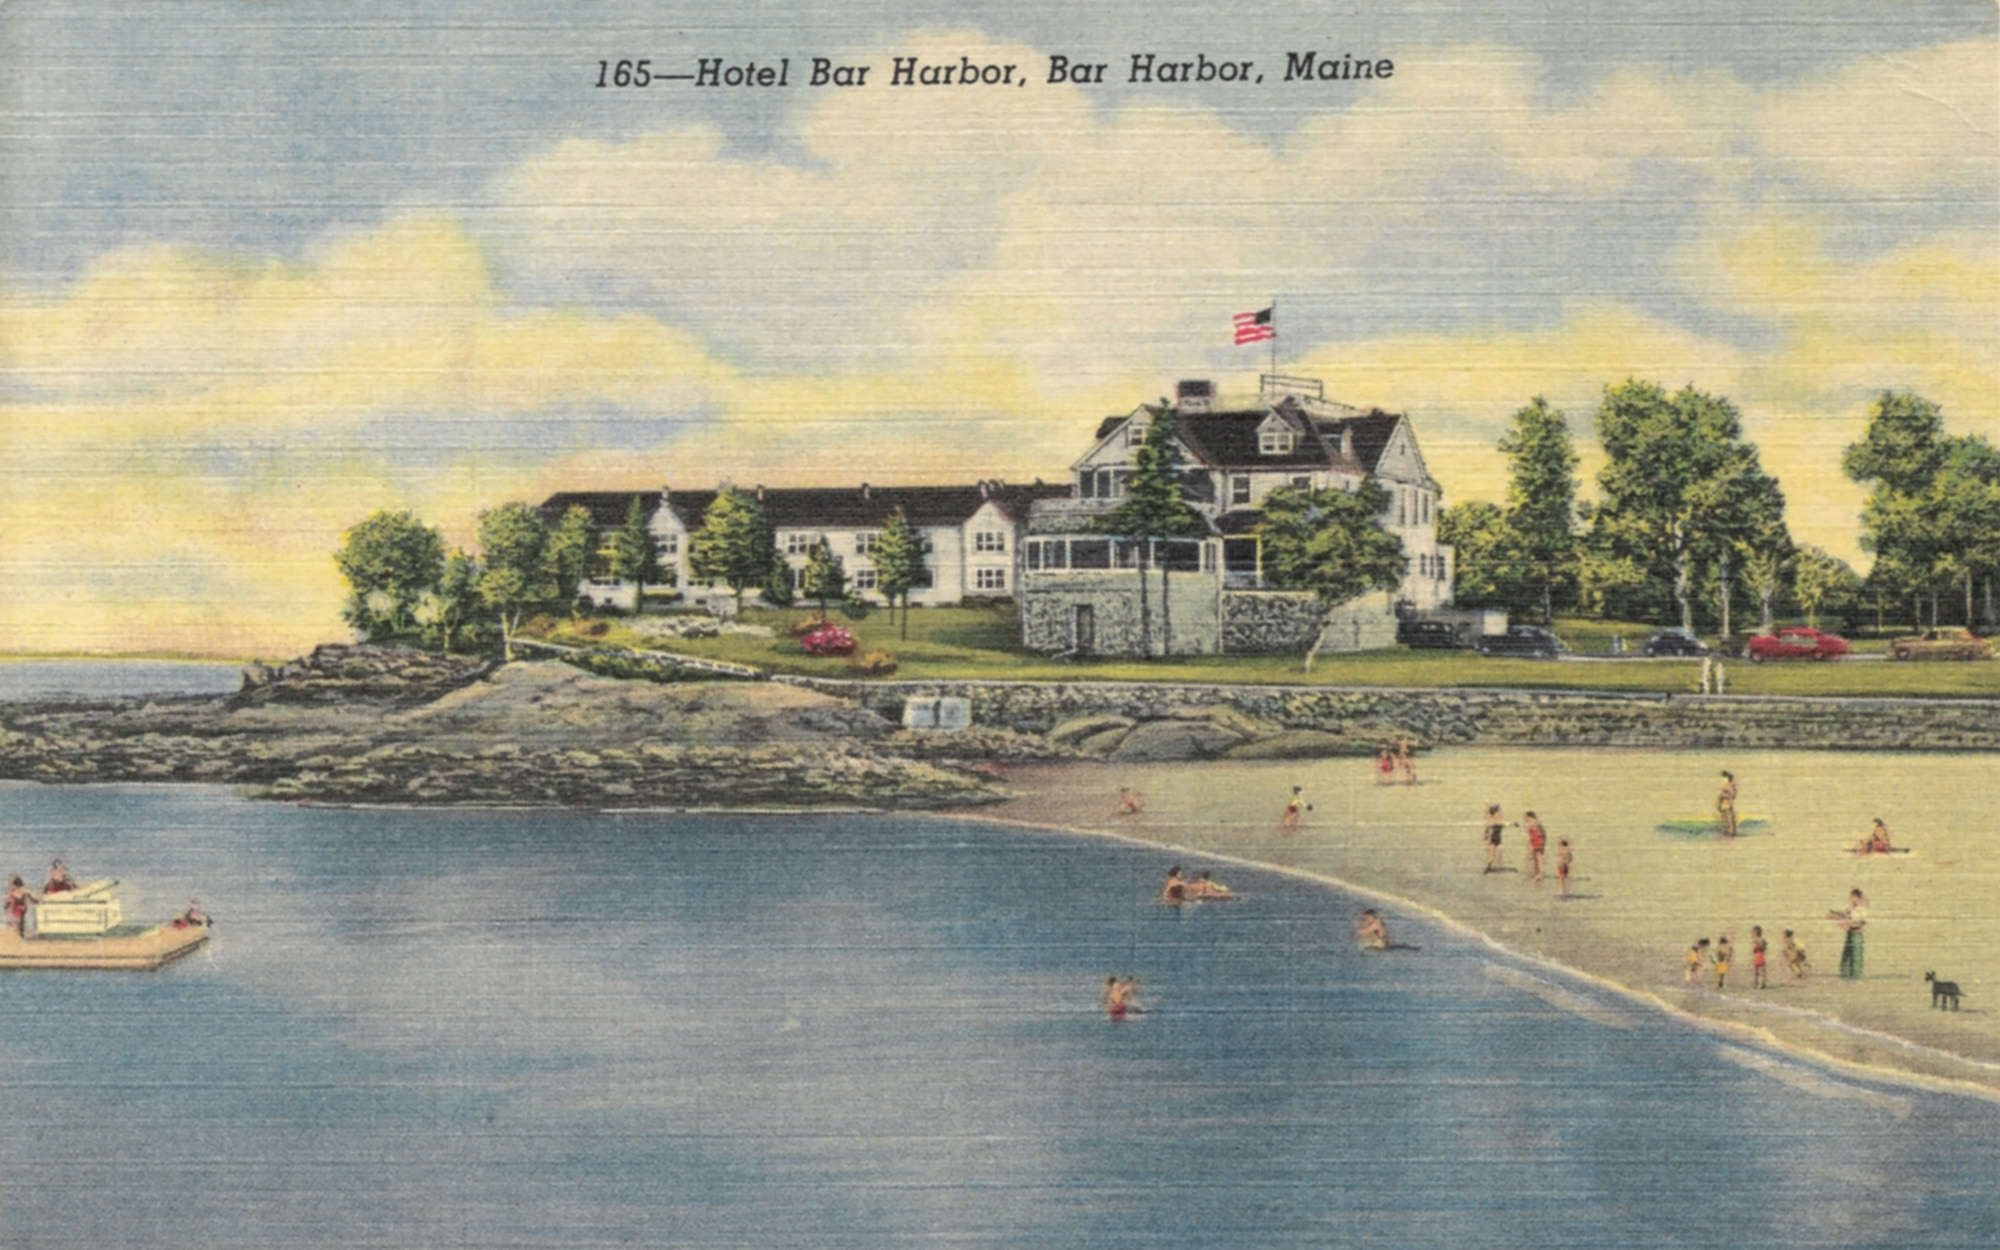 Historic image of Hotel Bar Harbor. Collection of the Bar Harbor Inn.